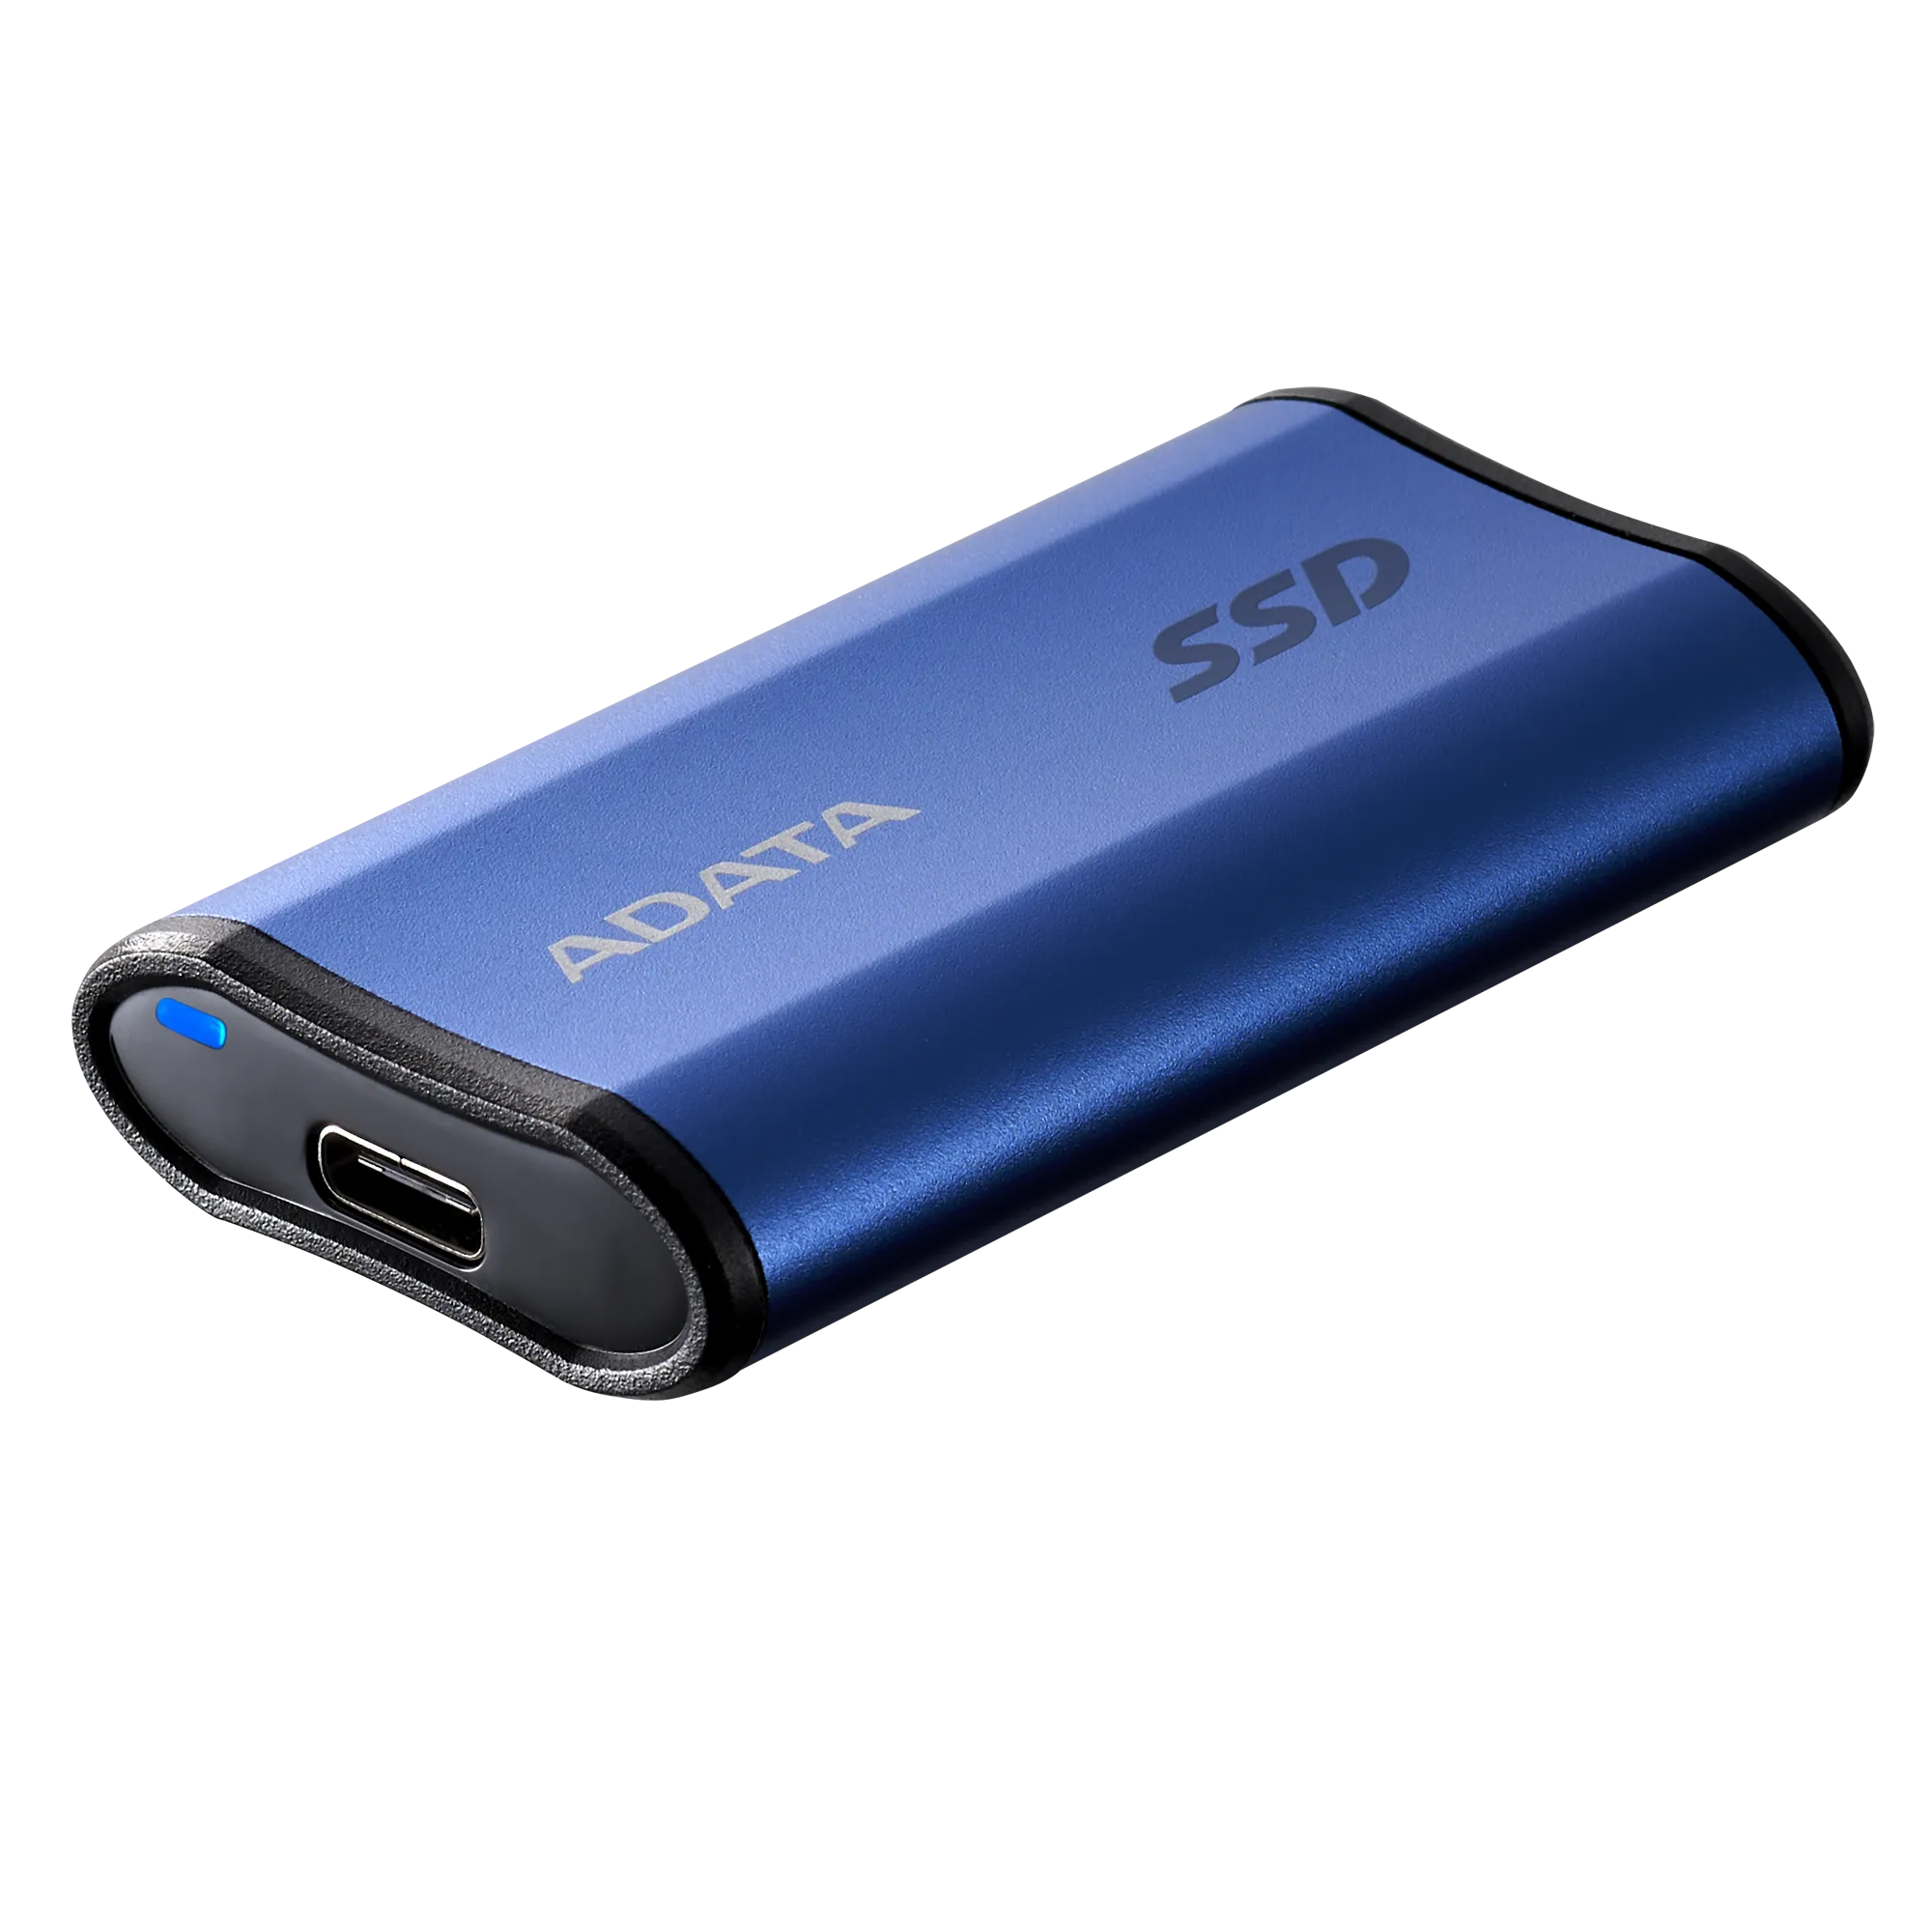 ADATA SE880 External SSD up to 2000MB/s